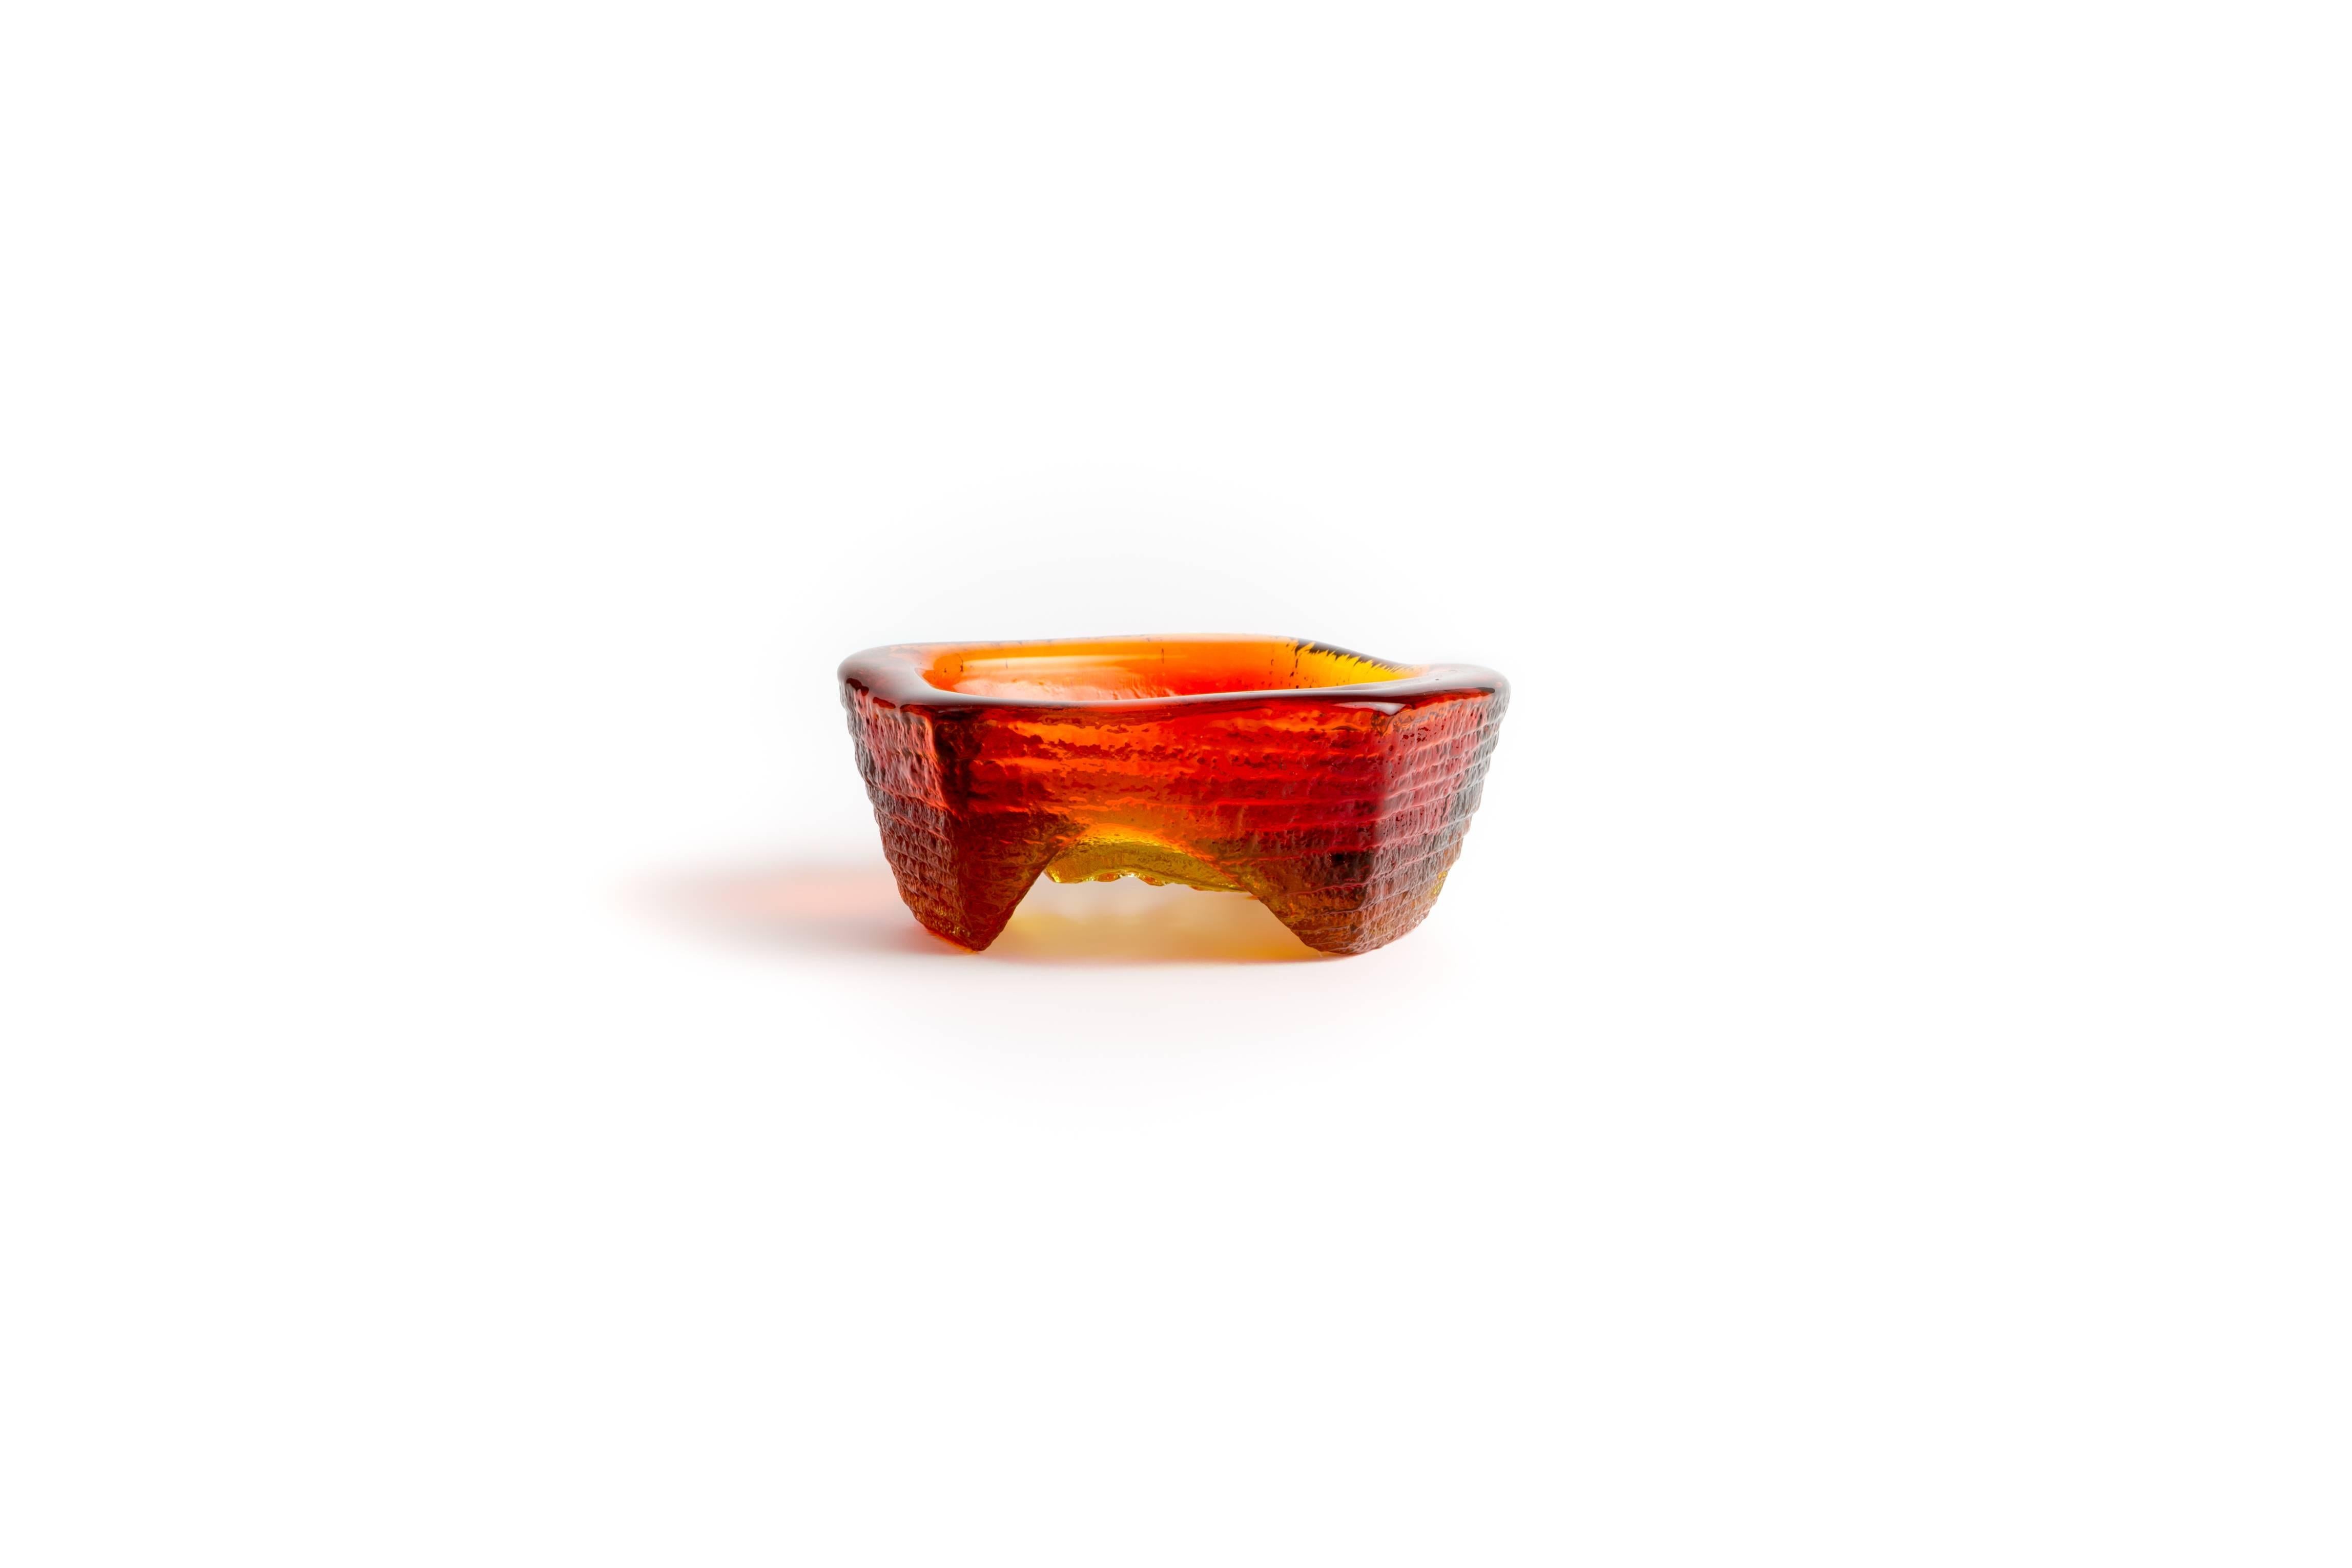 This is a (five) sided red and yellow bowl with legs that elevate it and a unique pattern cast on the bottom.